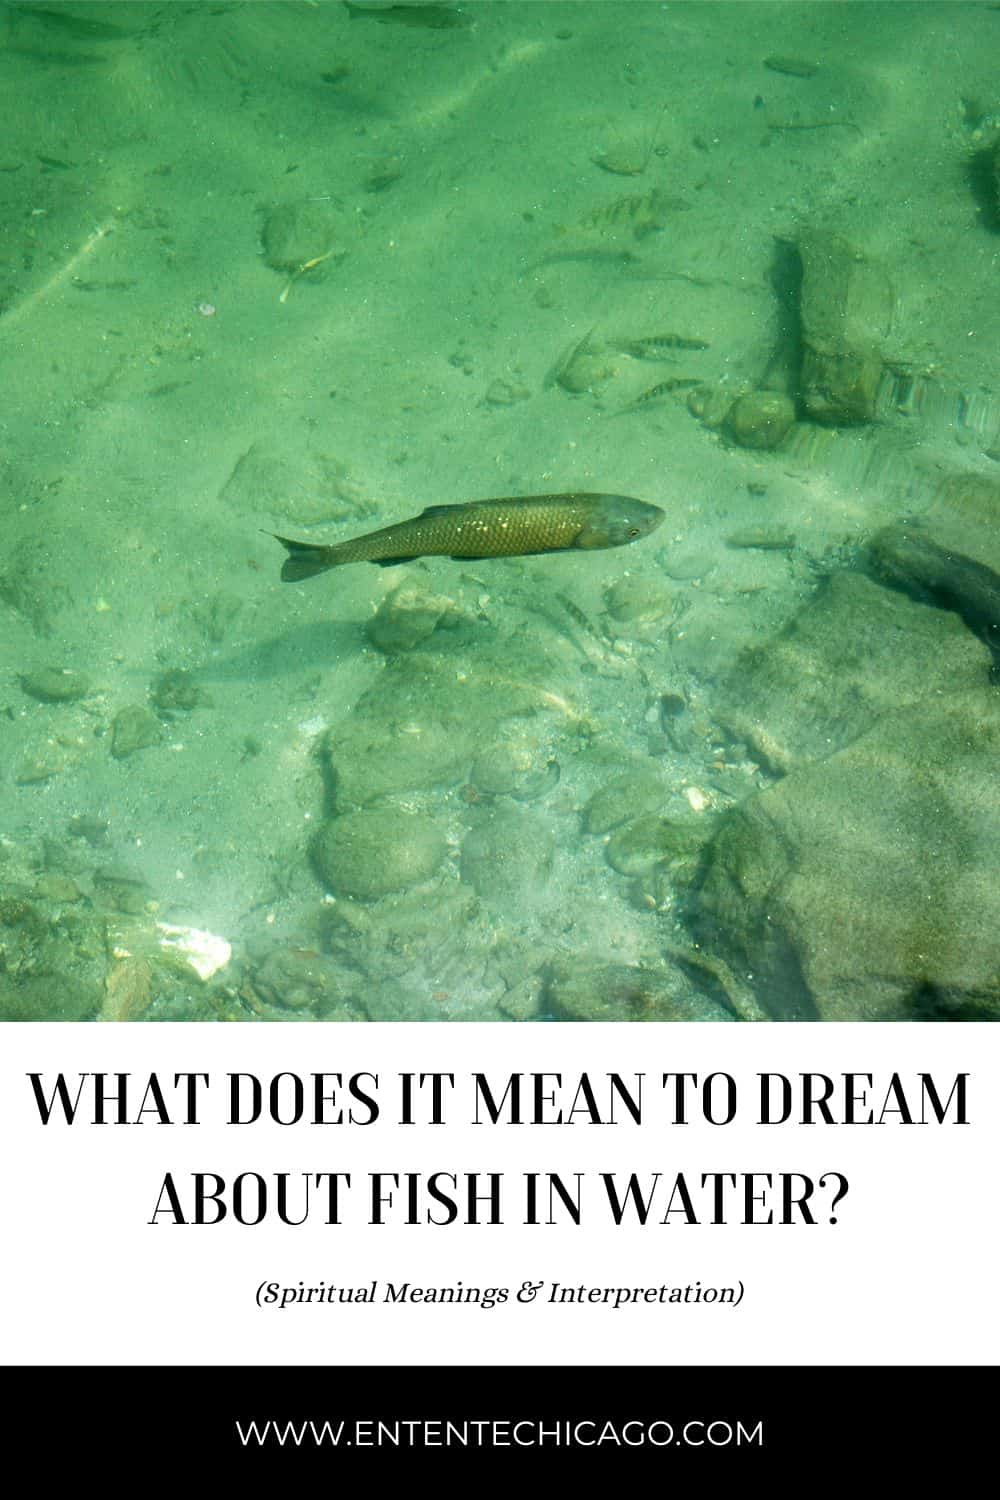 What Does It Mean To Dream About Fish In Water? (12 Spiritual Meanings)